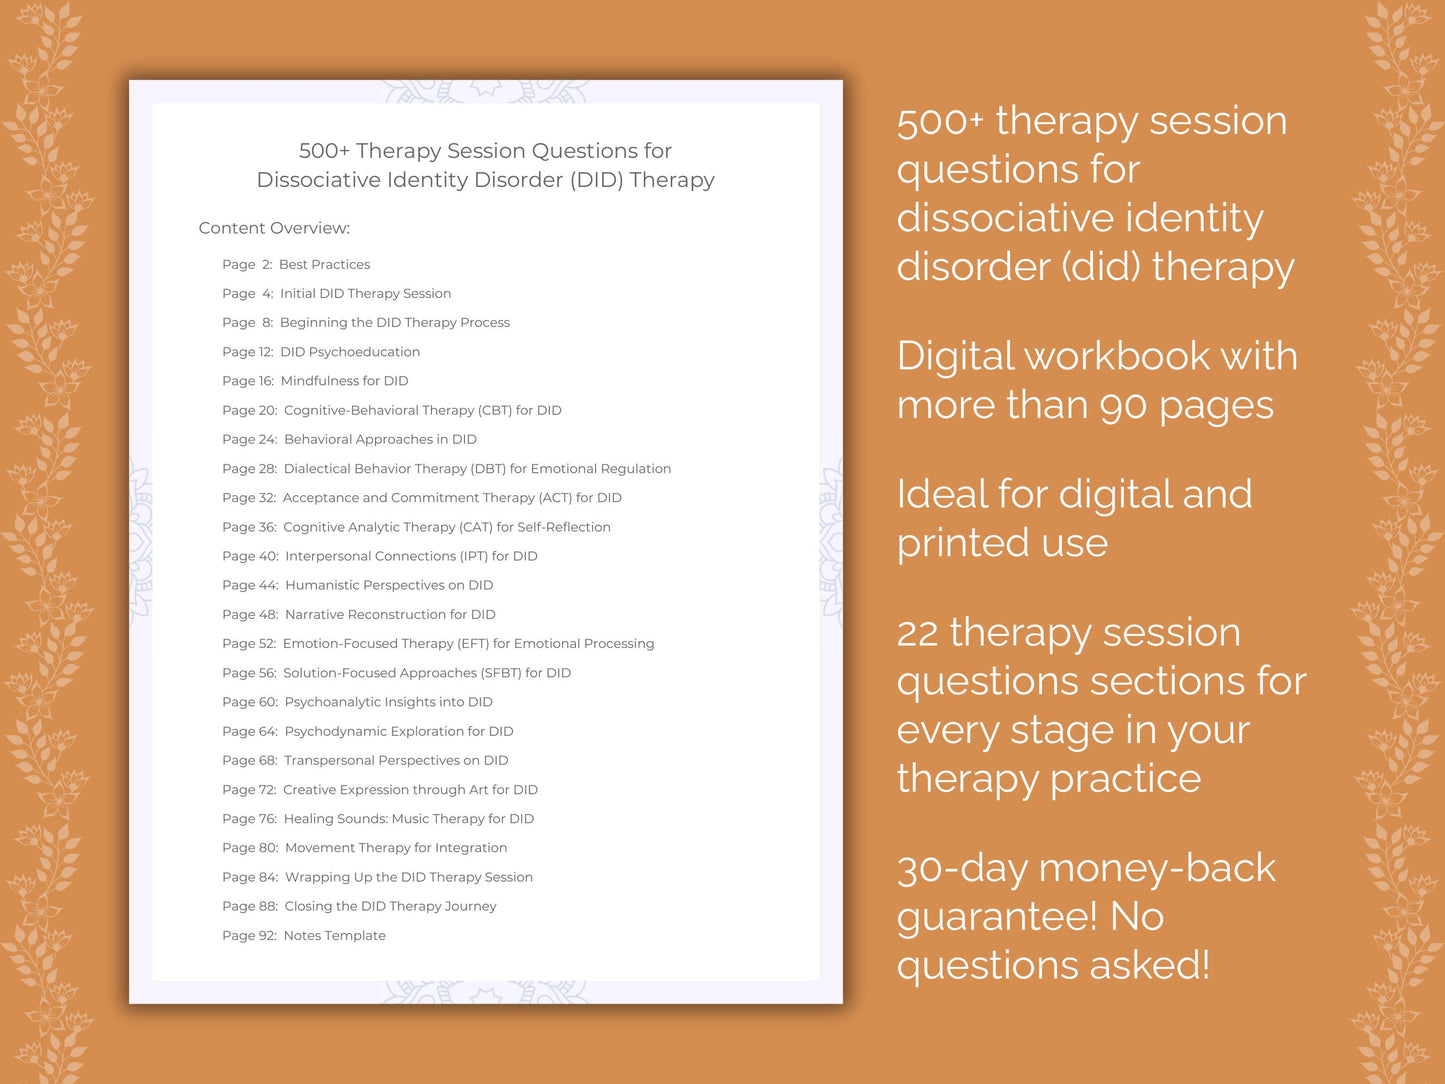 Dissociative Identity Disorder (DID) Therapy Session Questions Workbook